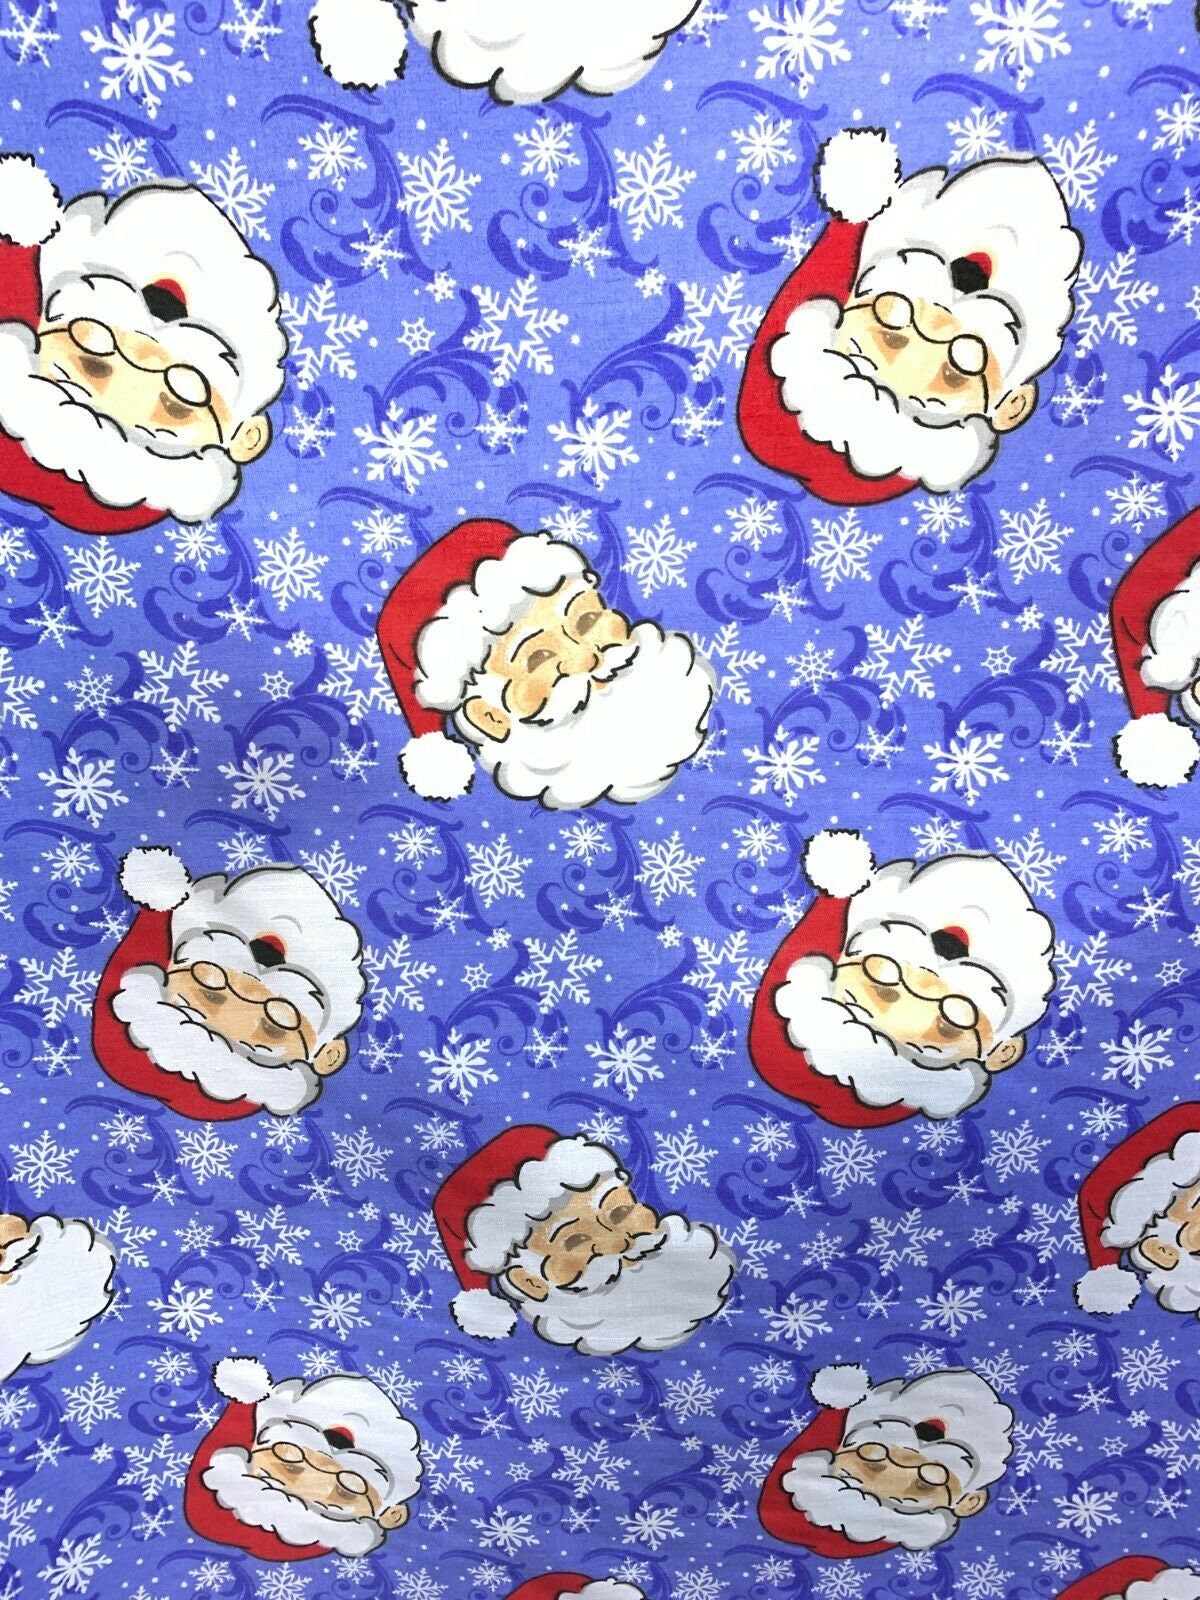 LIGHT BLUE MULTICOLOR Santa Claus Printed 100% Cotton Fabric (60 in.) Sold By The Yard